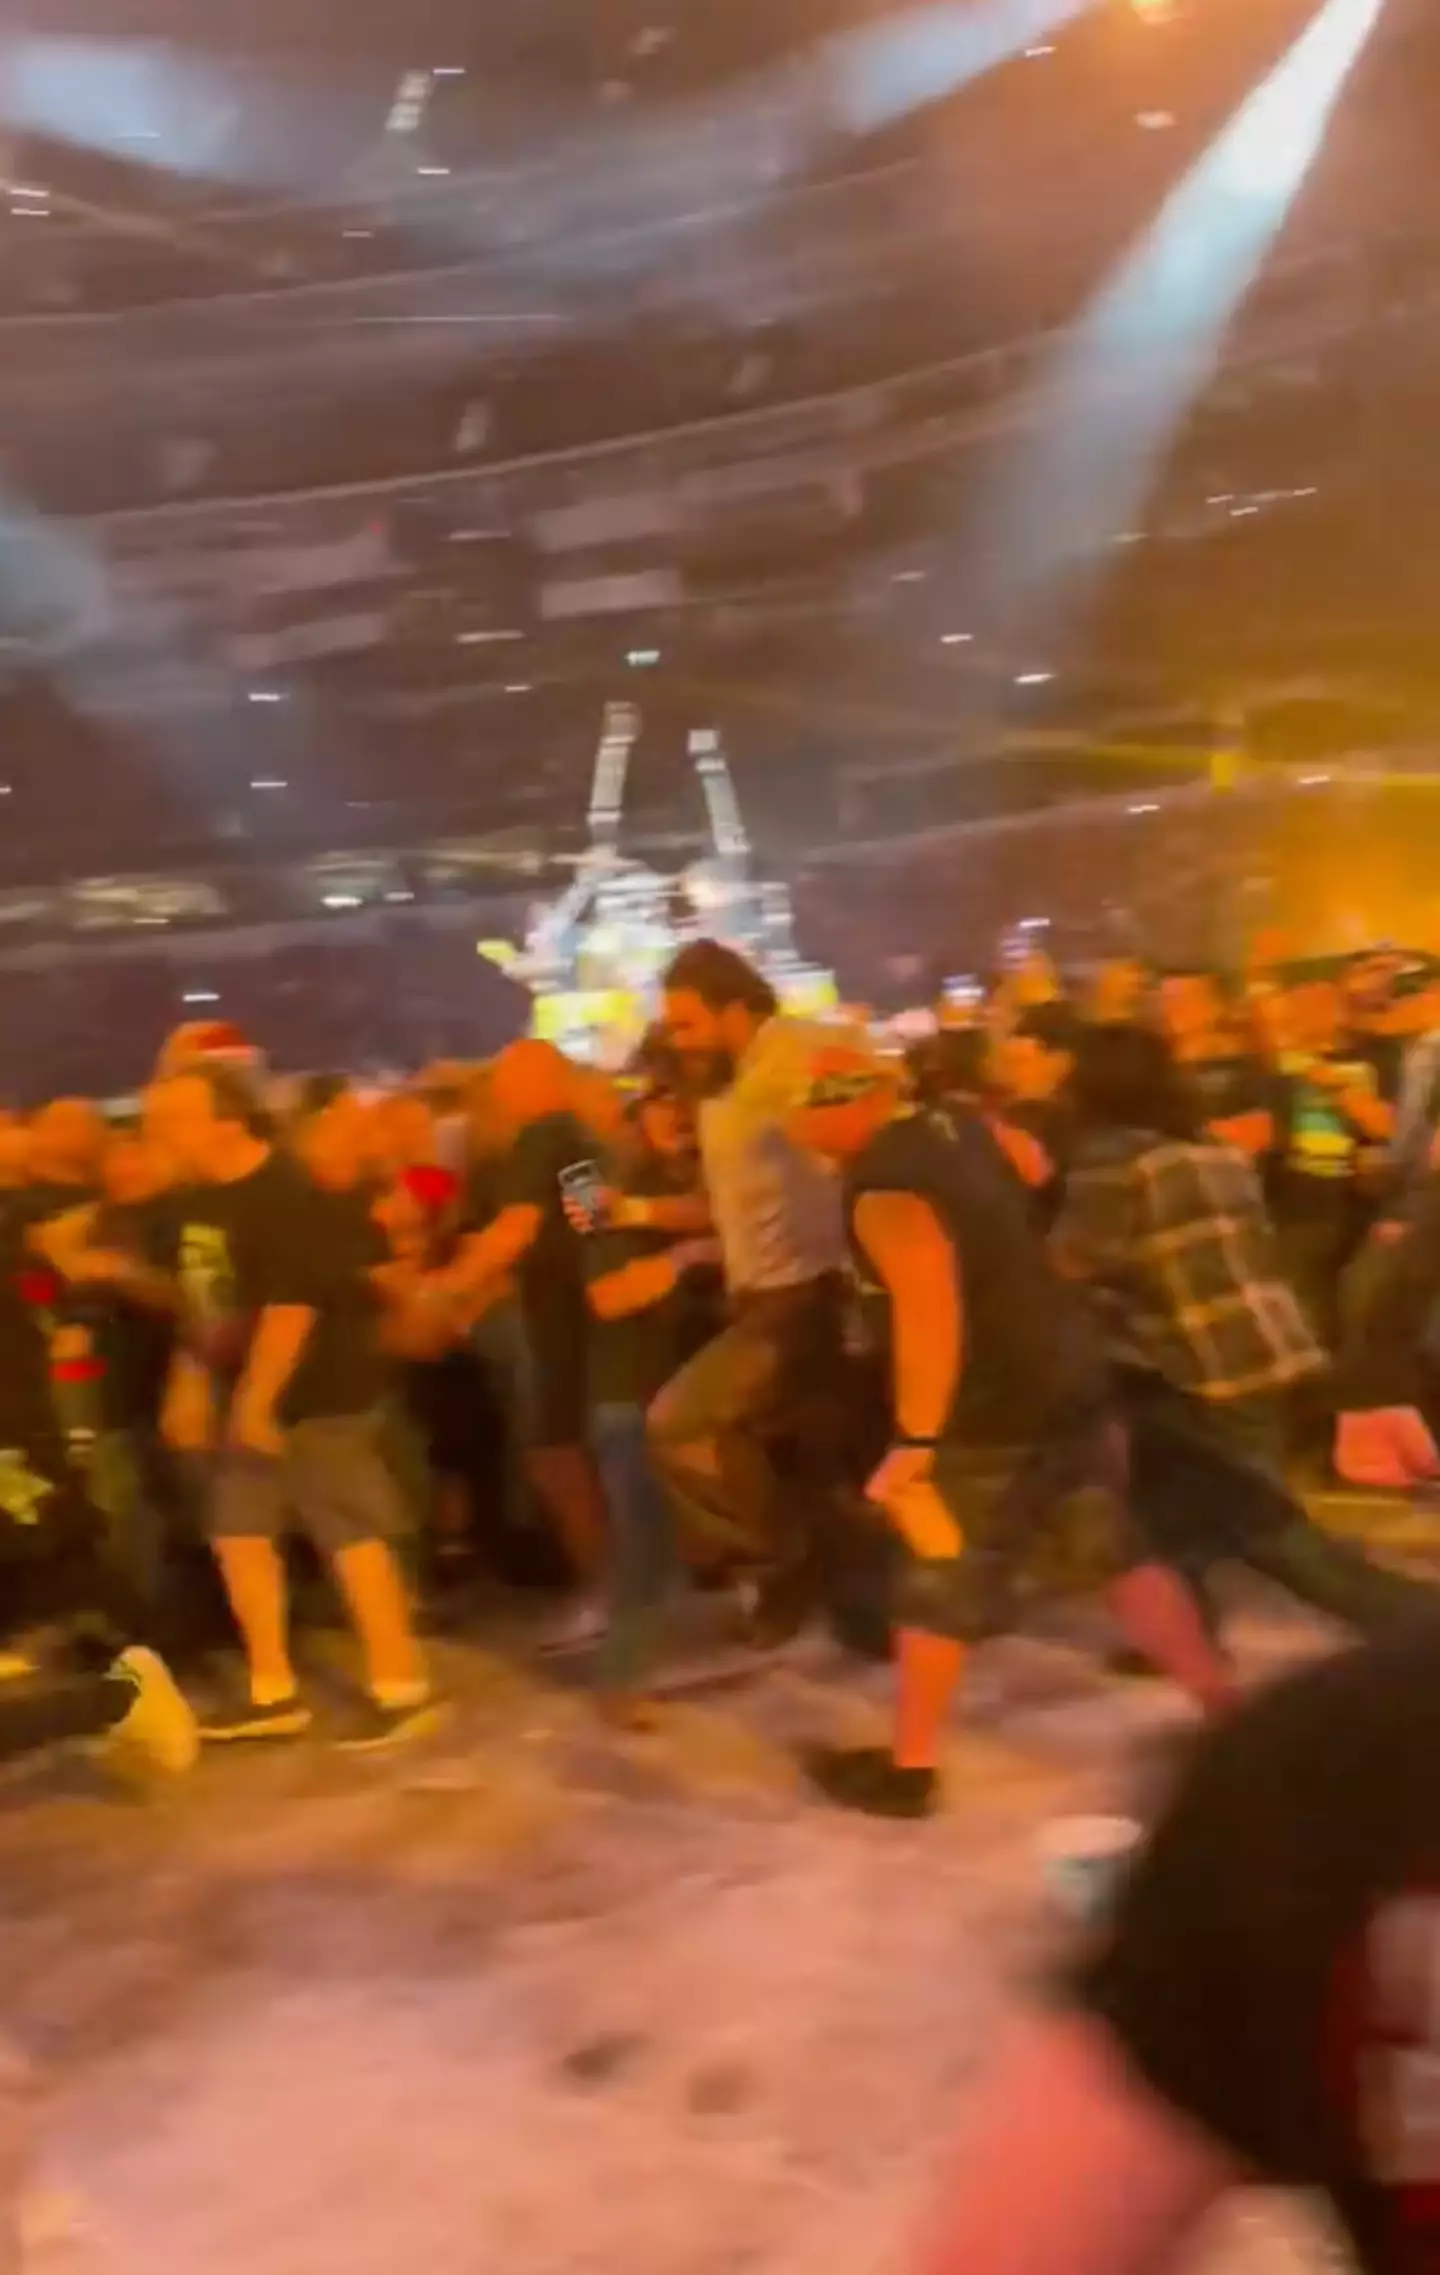 The A-List actor was filmed moshing at the LA gig.